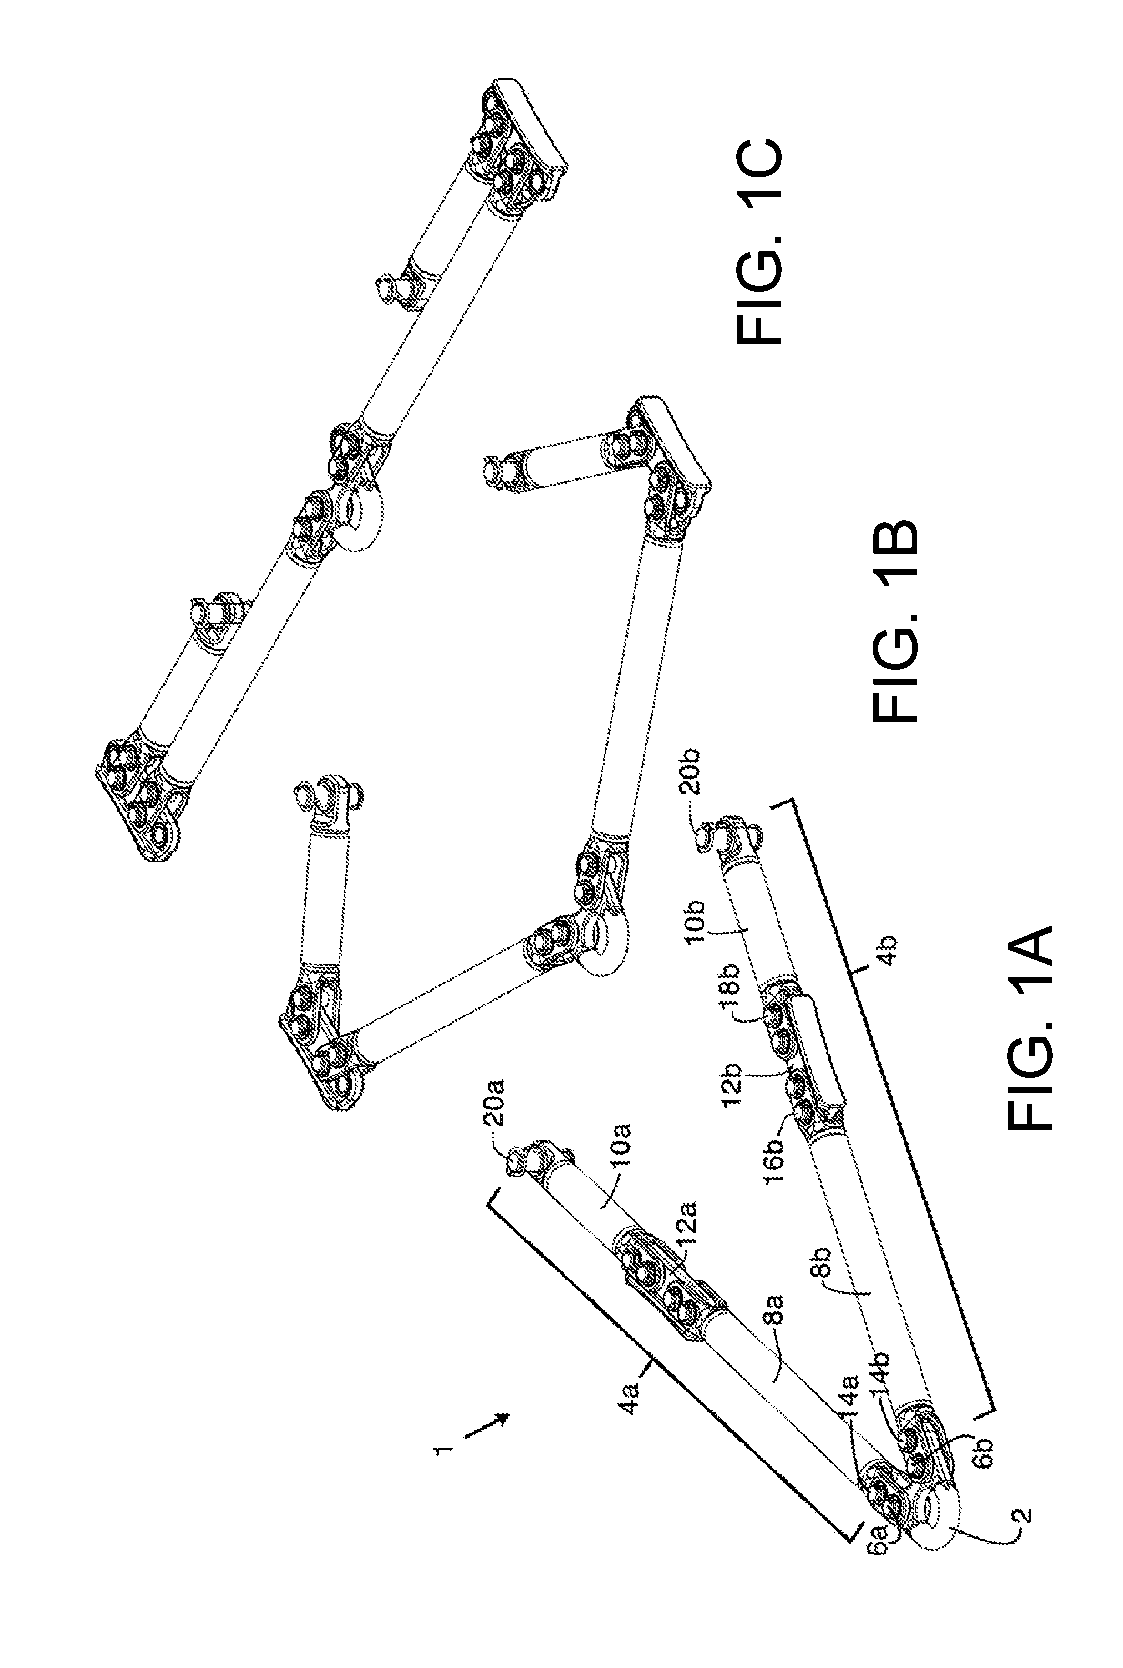 Towing assembly with automatic articulating mechanism